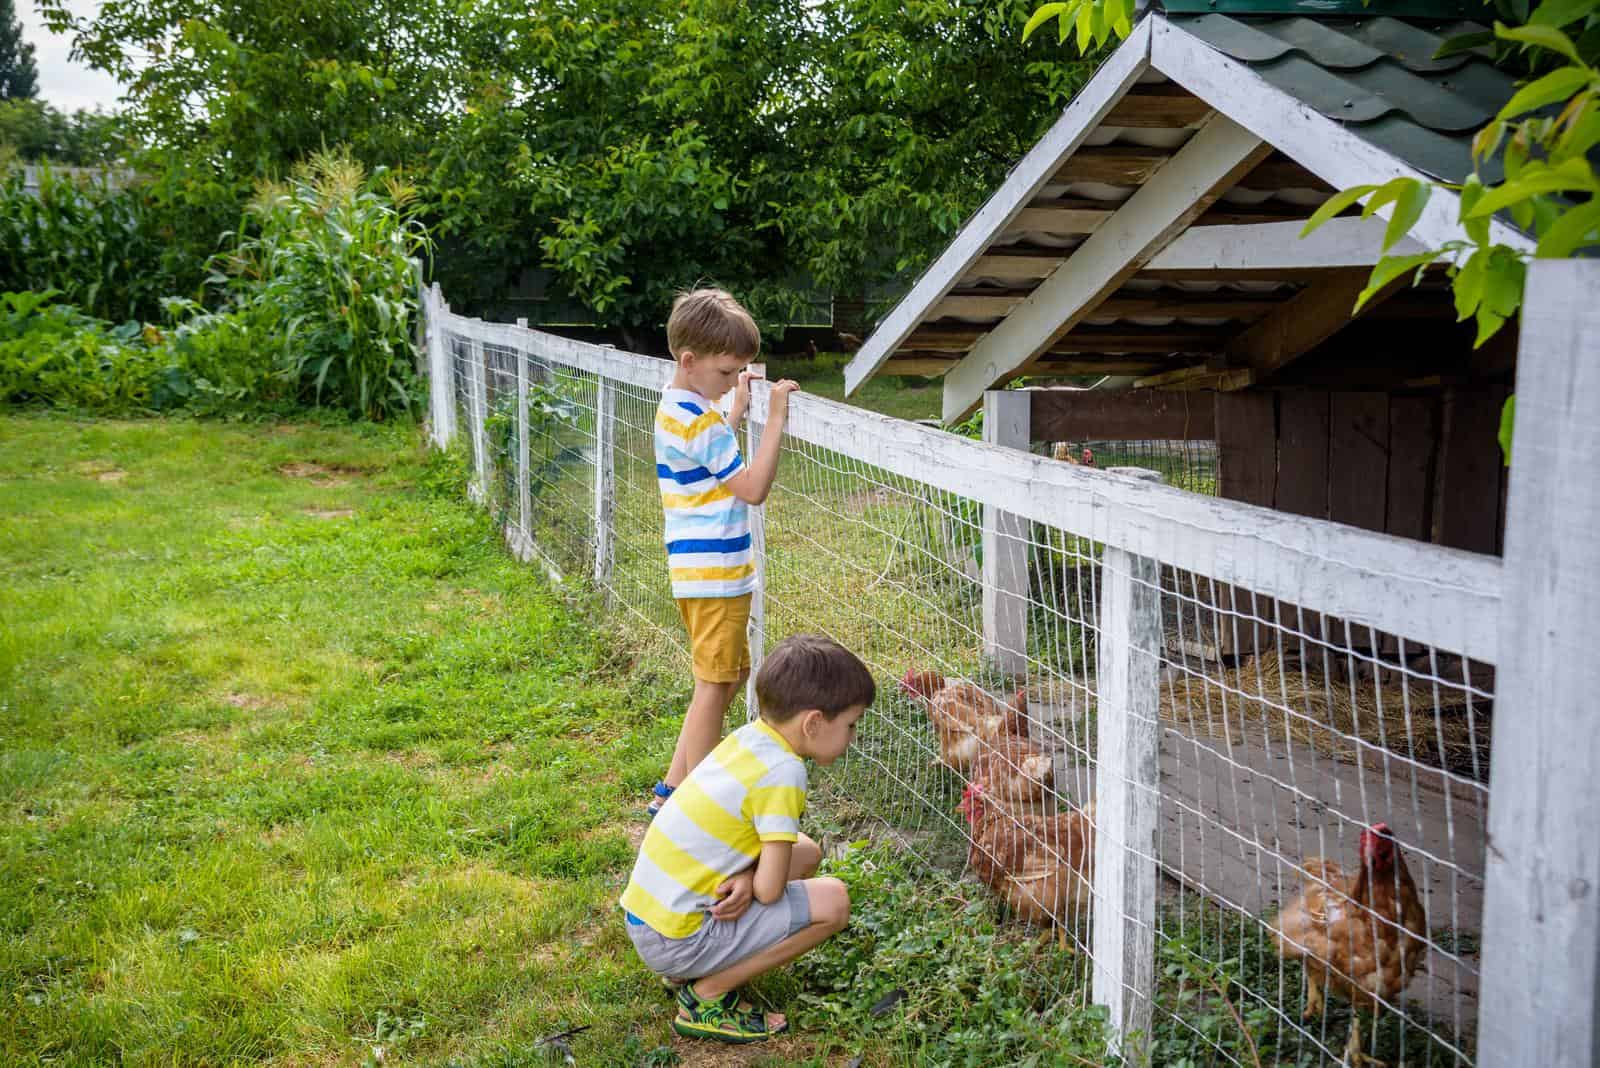 Two curious young boys eagerly peer through the fence of a chicken coop, captivated by a lively group of chickens.